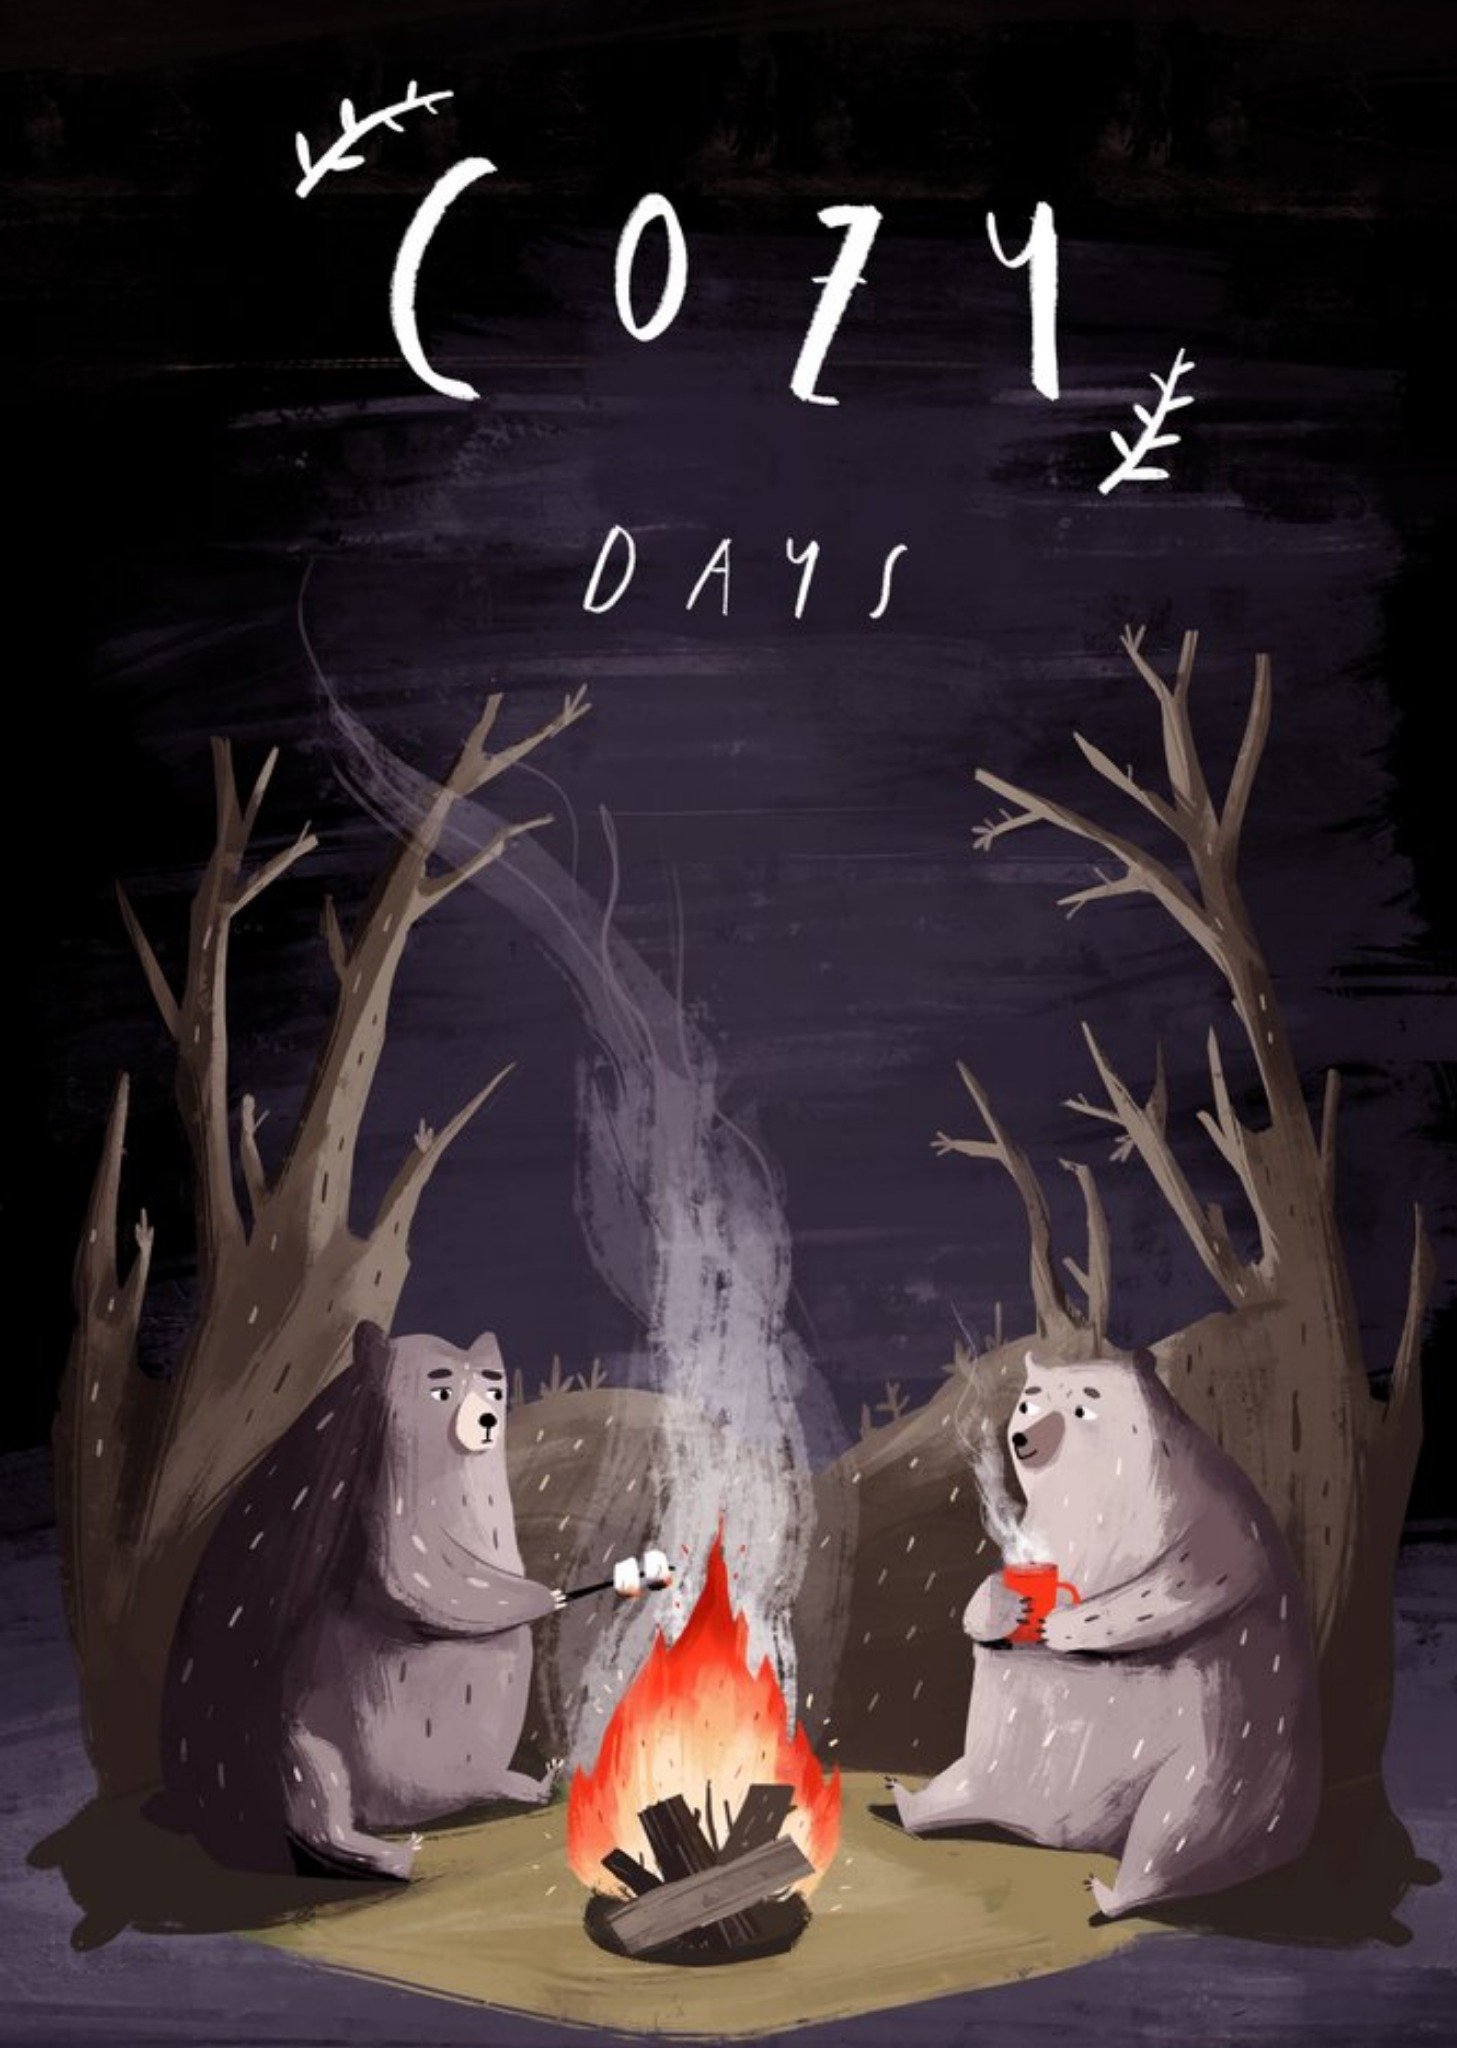 Moonpig Bears Around The Campfire Cozy Date Card, Large